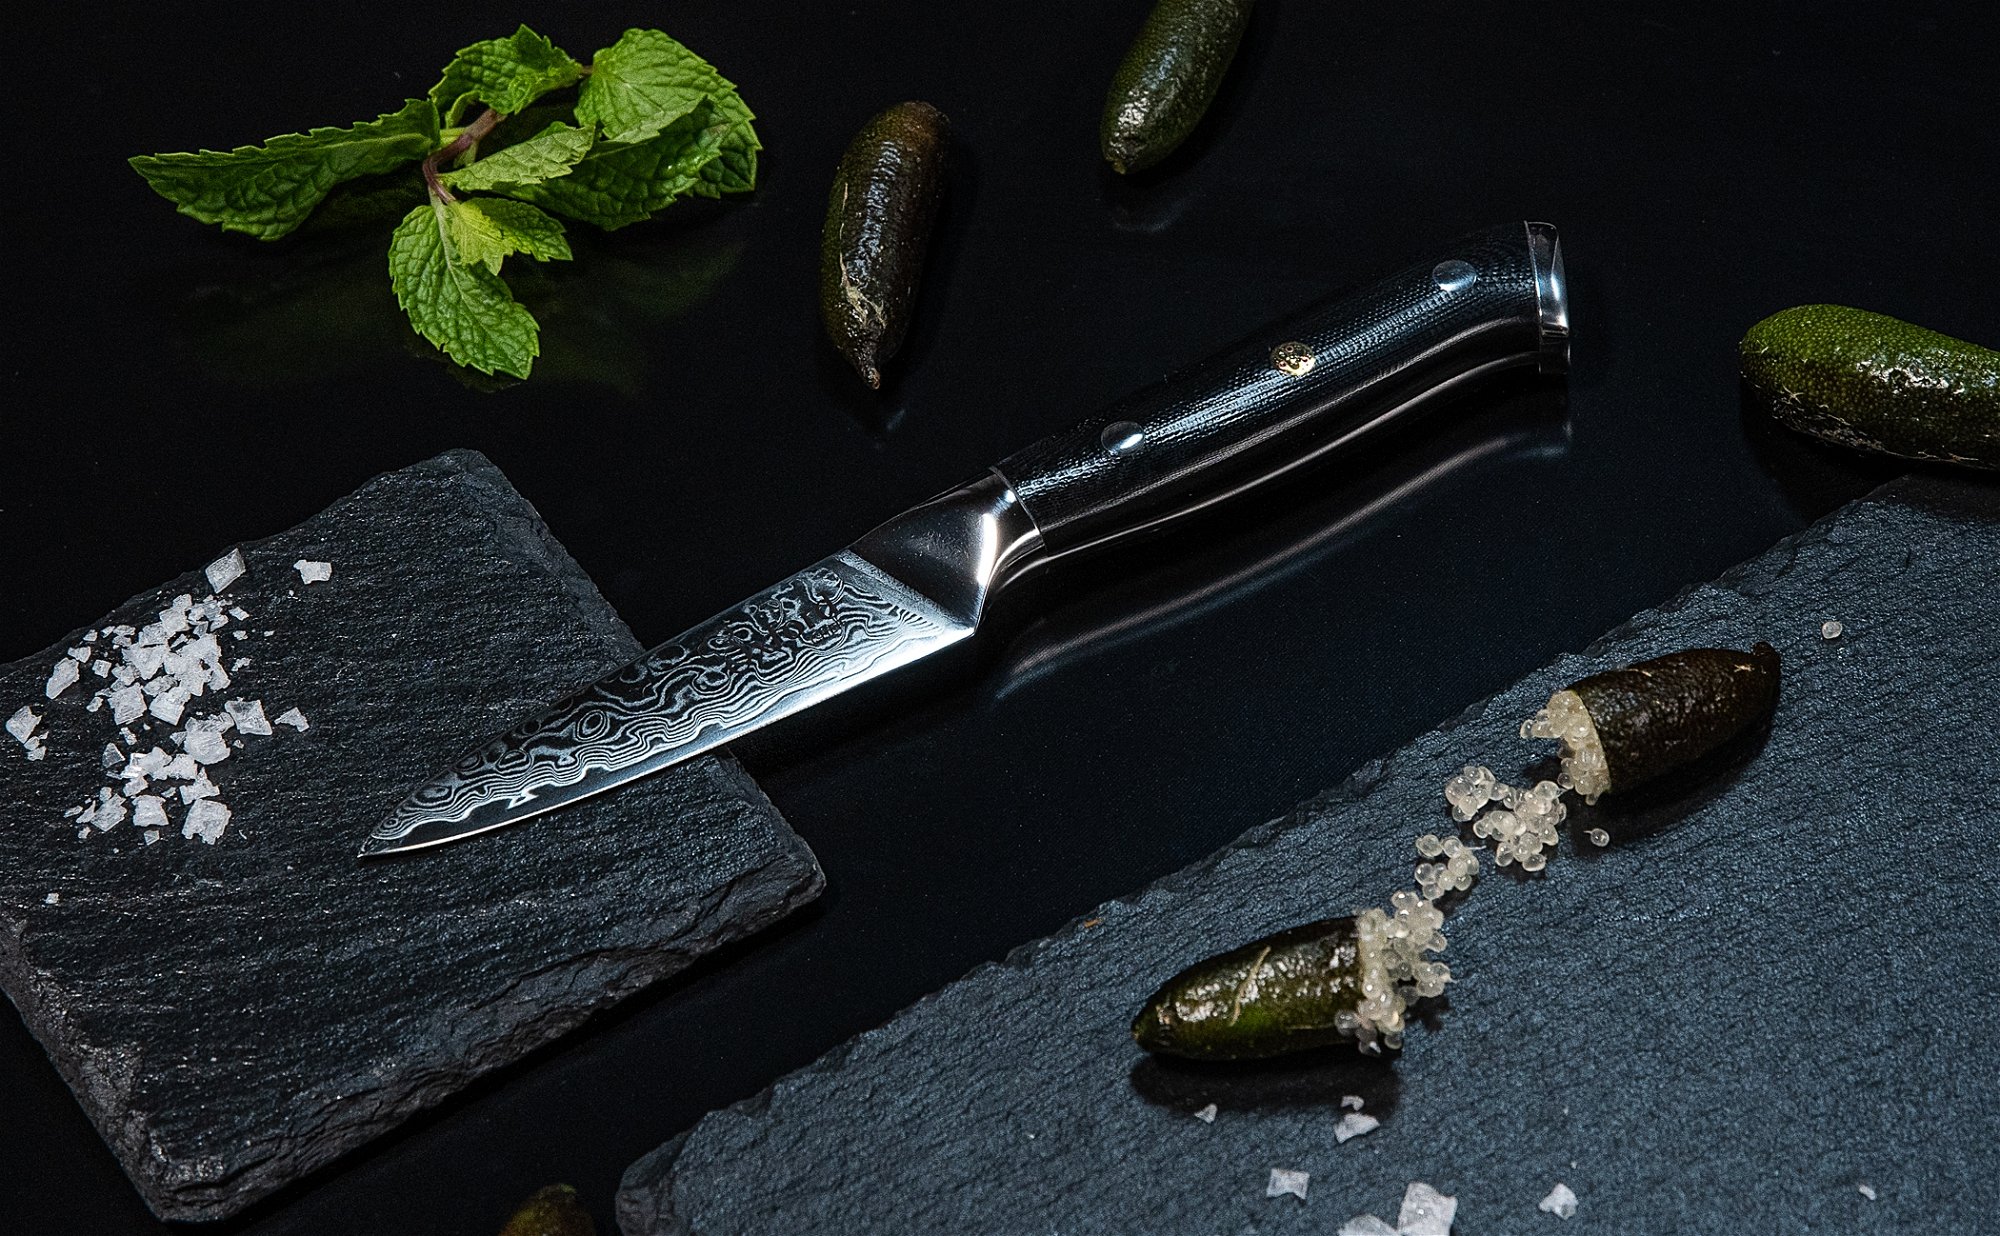  OXFORD CHEF Chefs Knife 8 inch Best Damascus- Japanese- VG10  Super Steel 67 Layer High Carbon Stainless Steel-Razor Sharp, Stain &  Corrosion Resistant, Awesome Edge Retention: Home & Kitchen